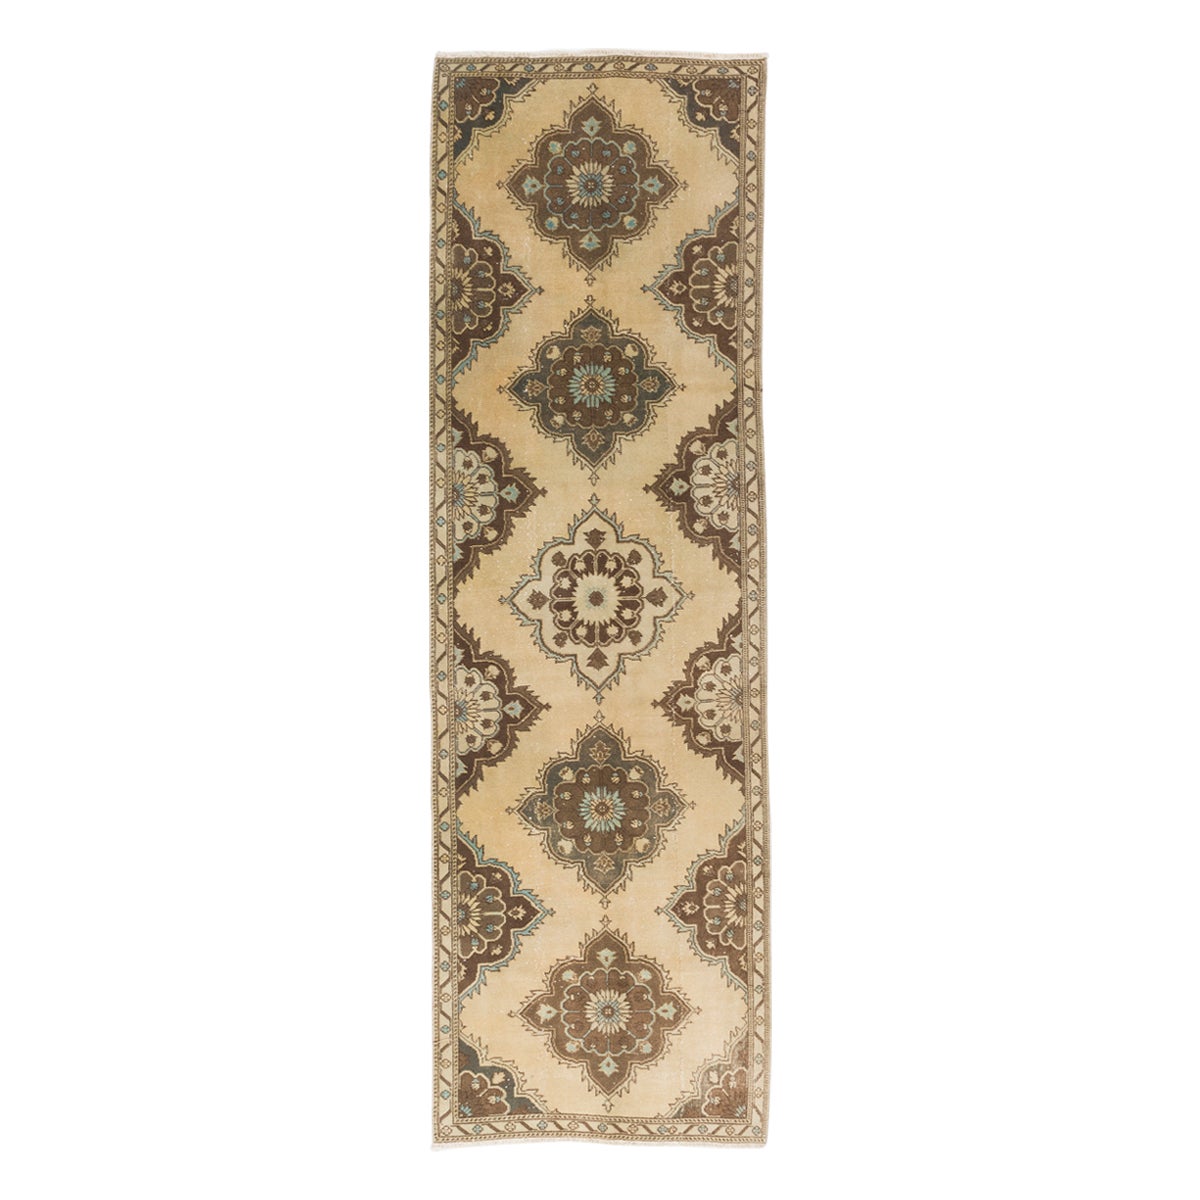 3.6x11.7 Ft Vintage Oushak Runner, Authentic Hand-Knotted Turkish Rug in Beige